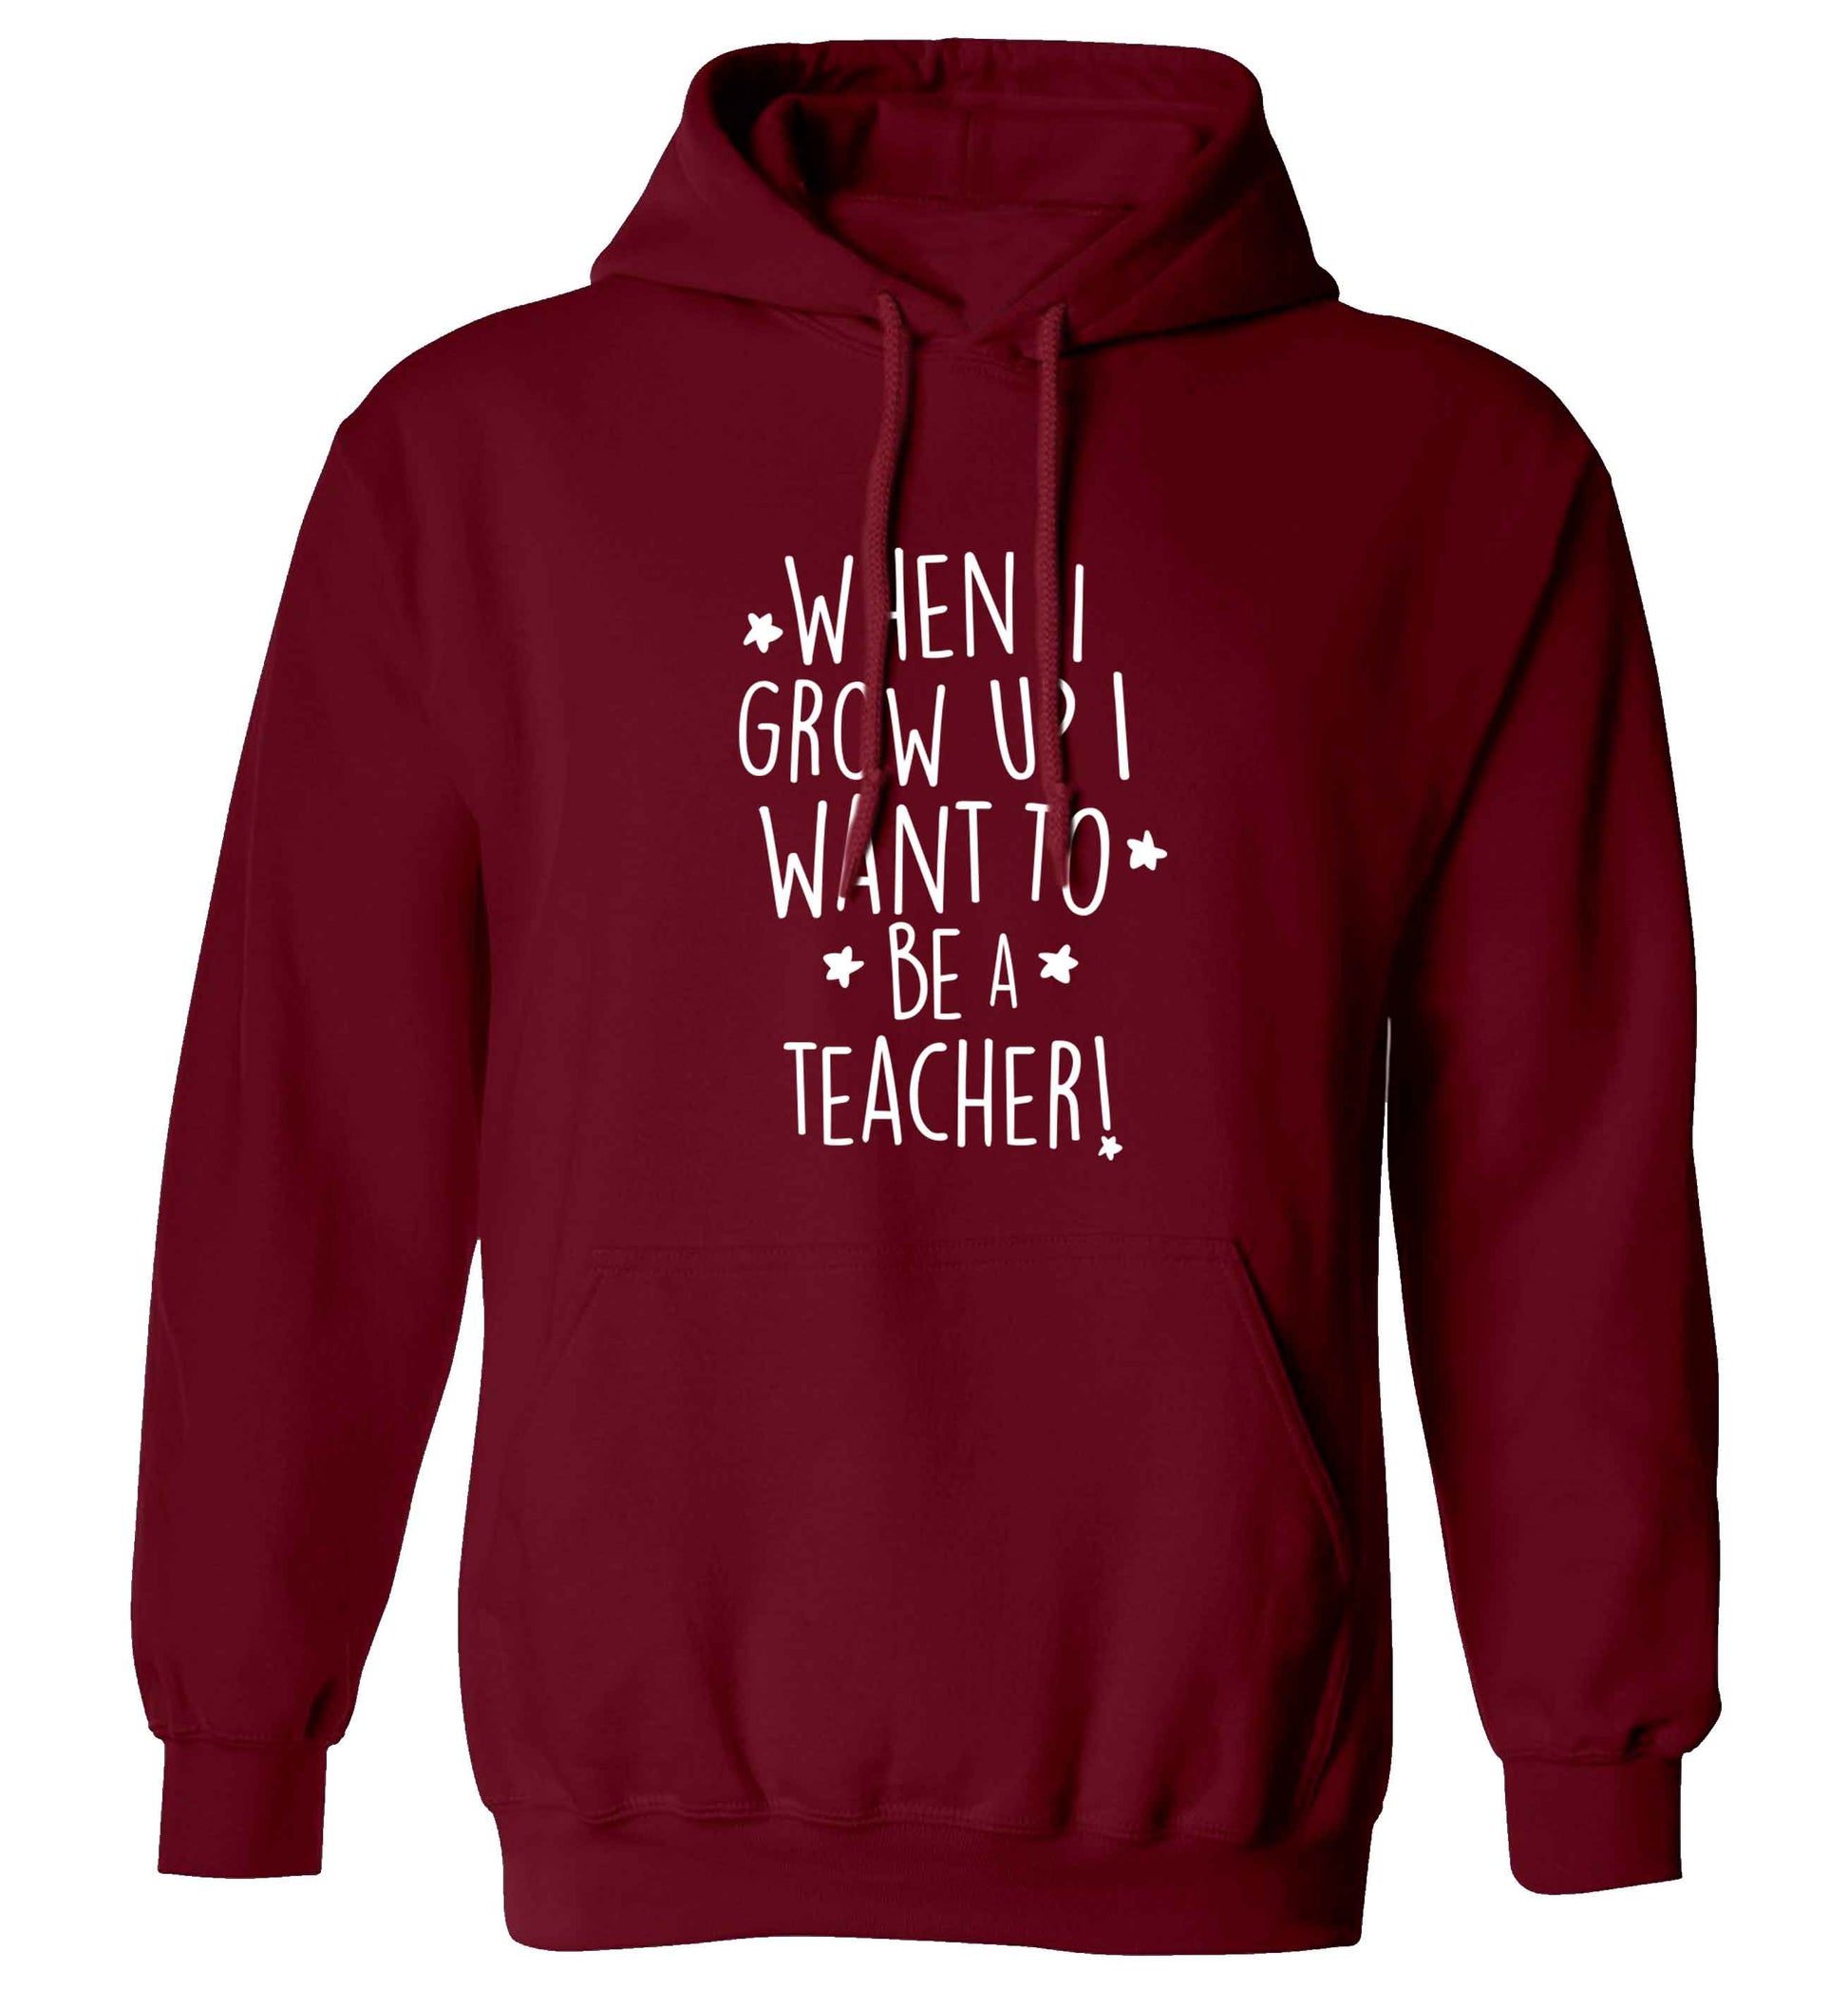 When I grow up I want to be a teacher adults unisex maroon hoodie 2XL